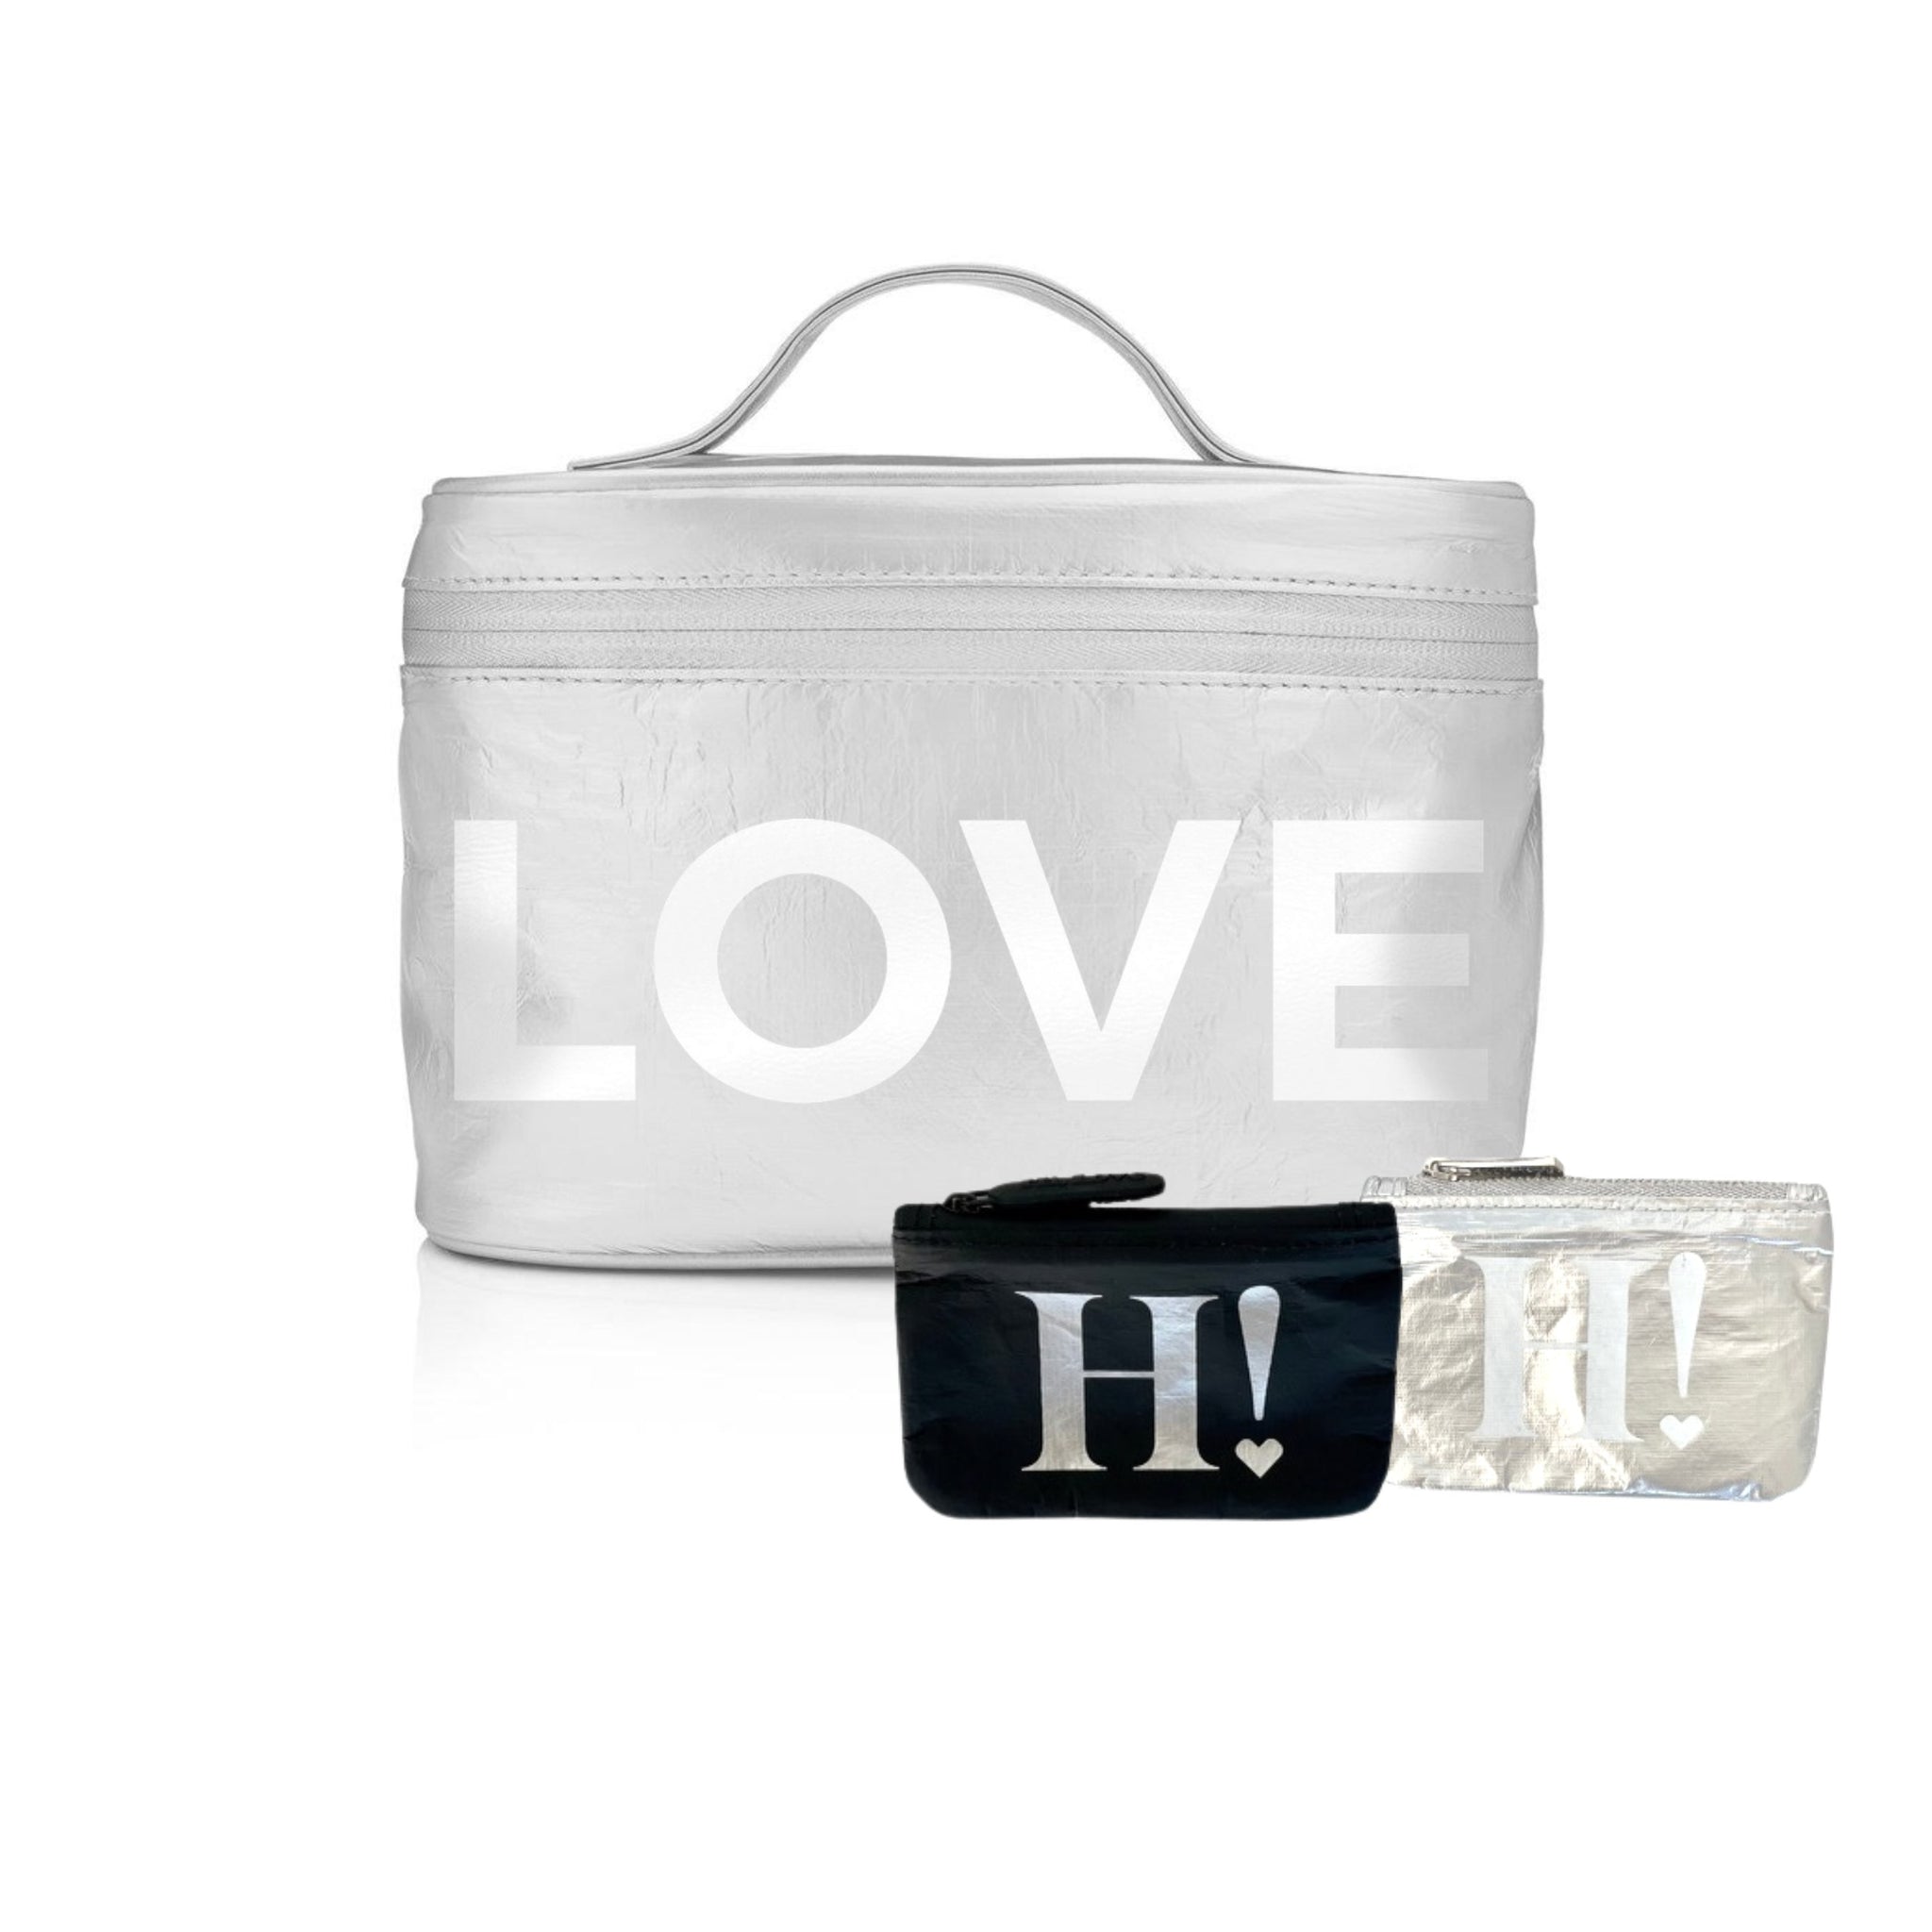 Set of Three - Overnight Cosmetic Set in Silver and Black with LOVE and H! Logo